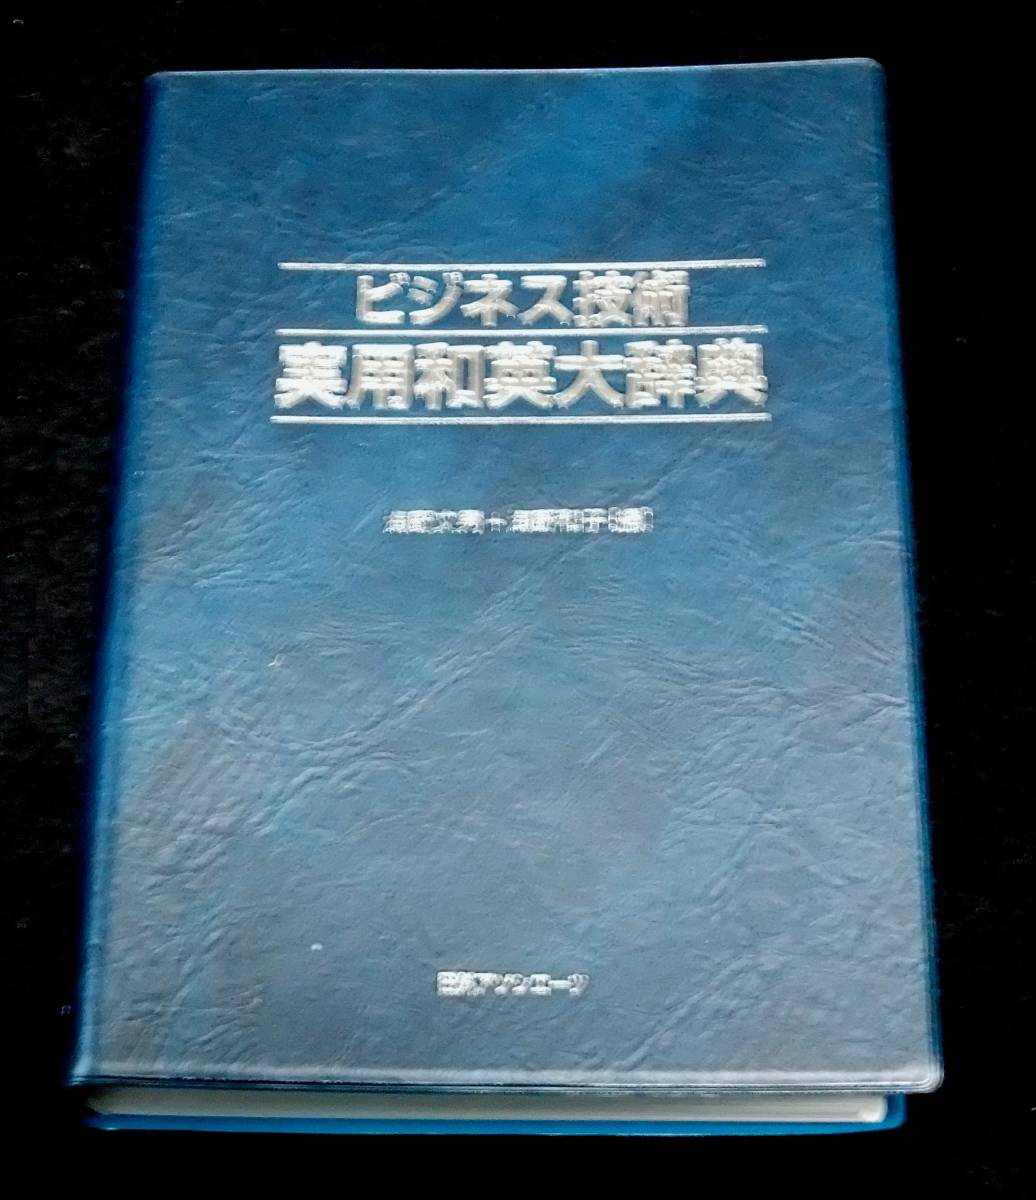 [ business technology practical use peace britain large dictionary ]